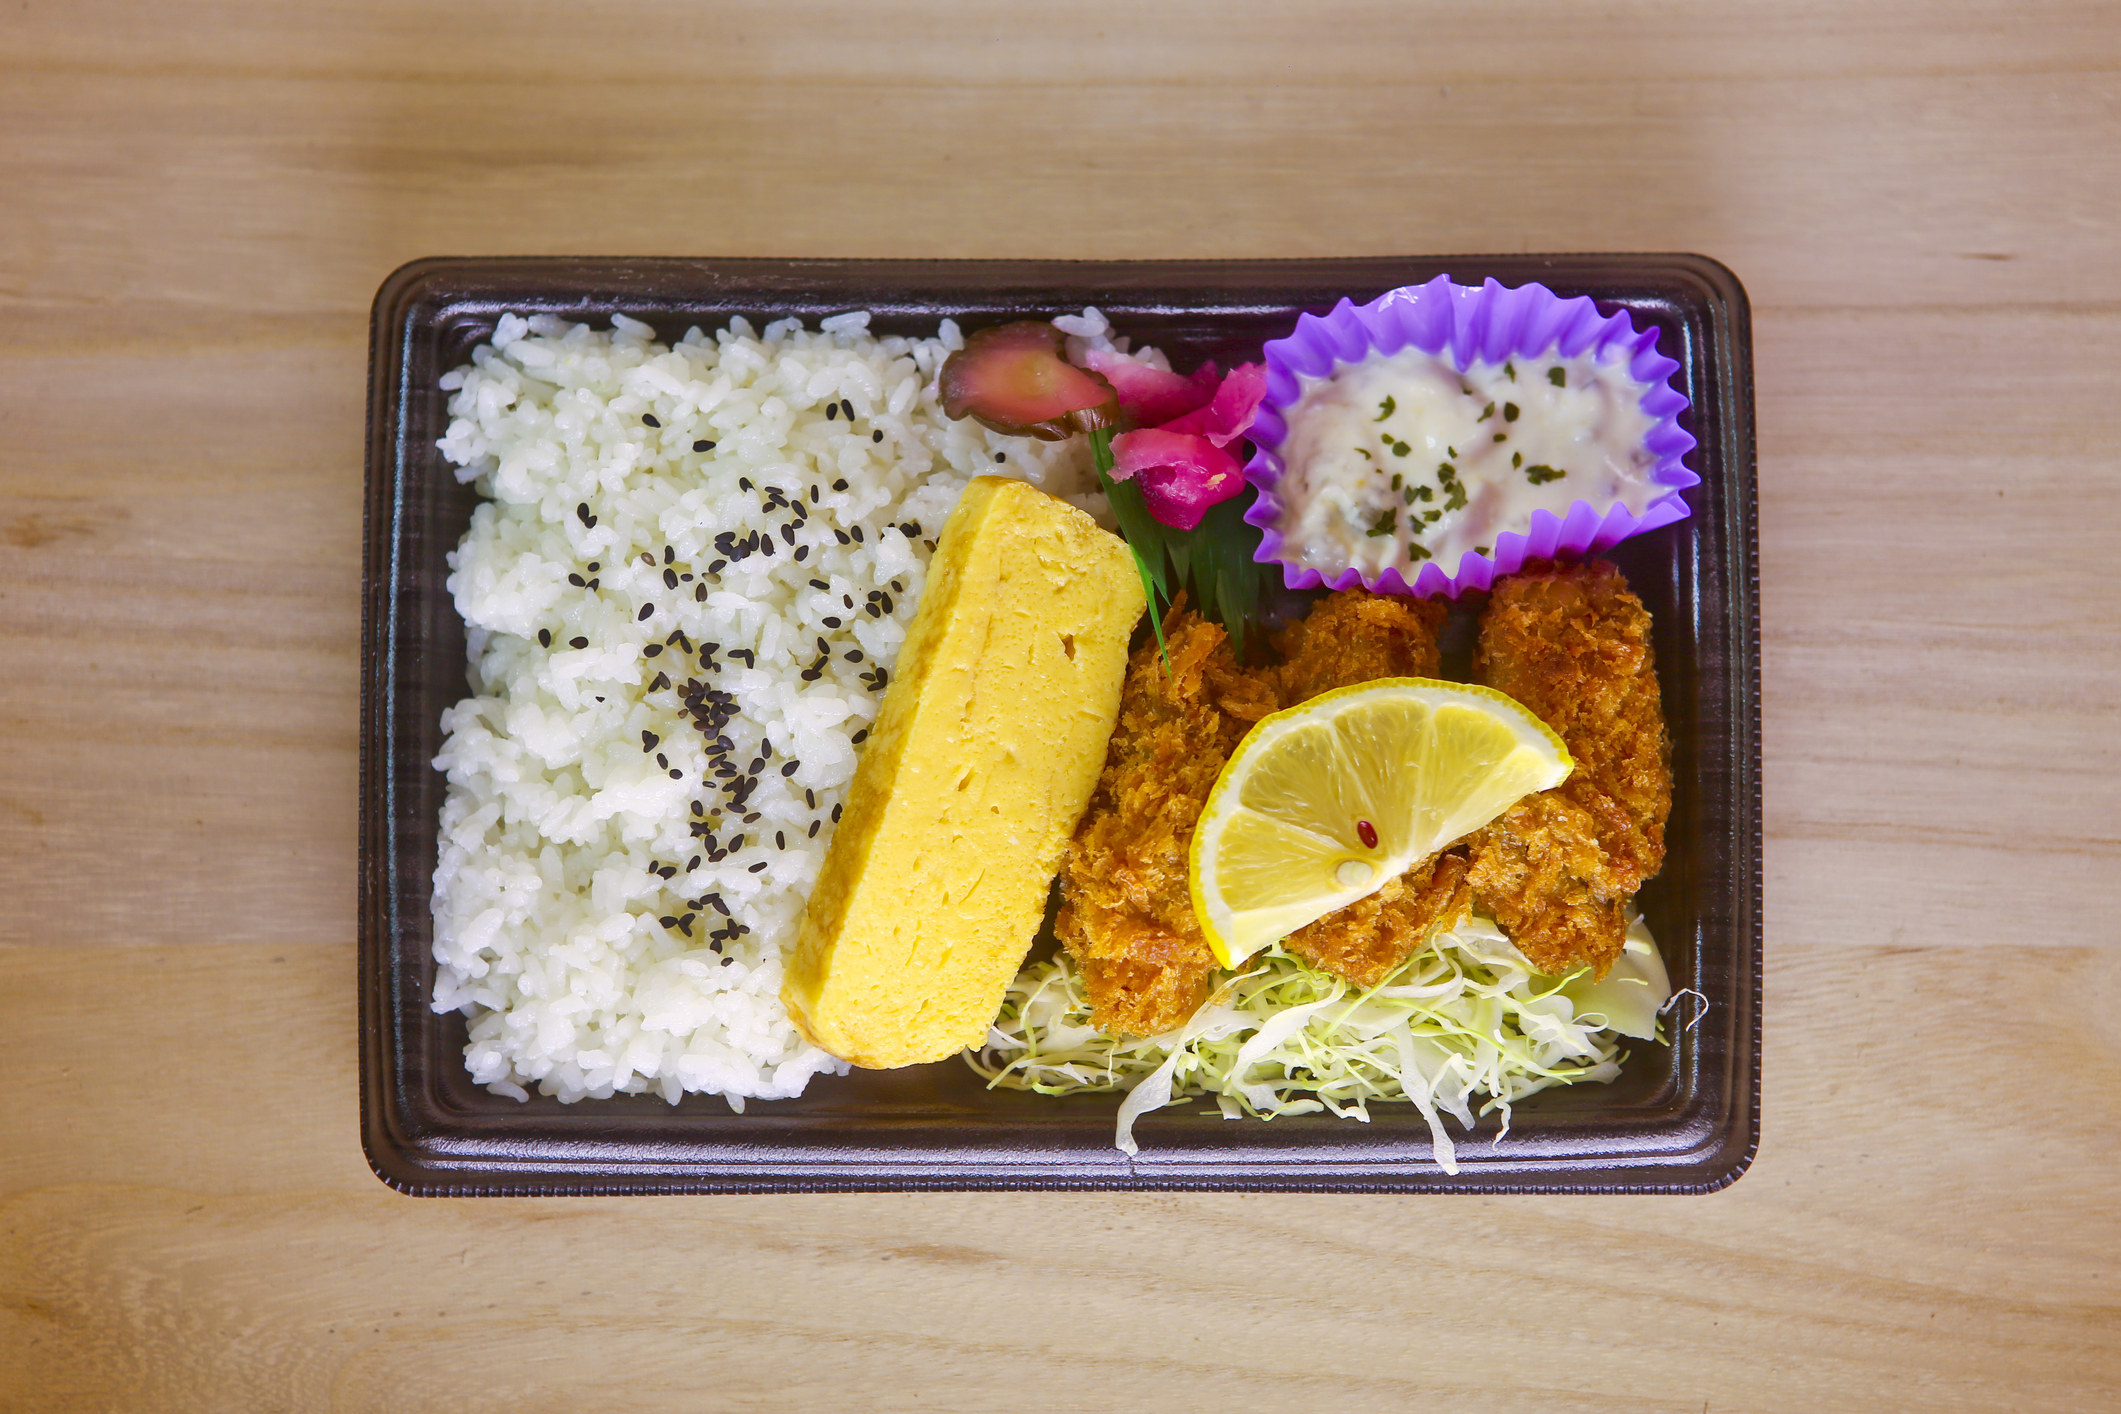 A Japanese bento box lunch.